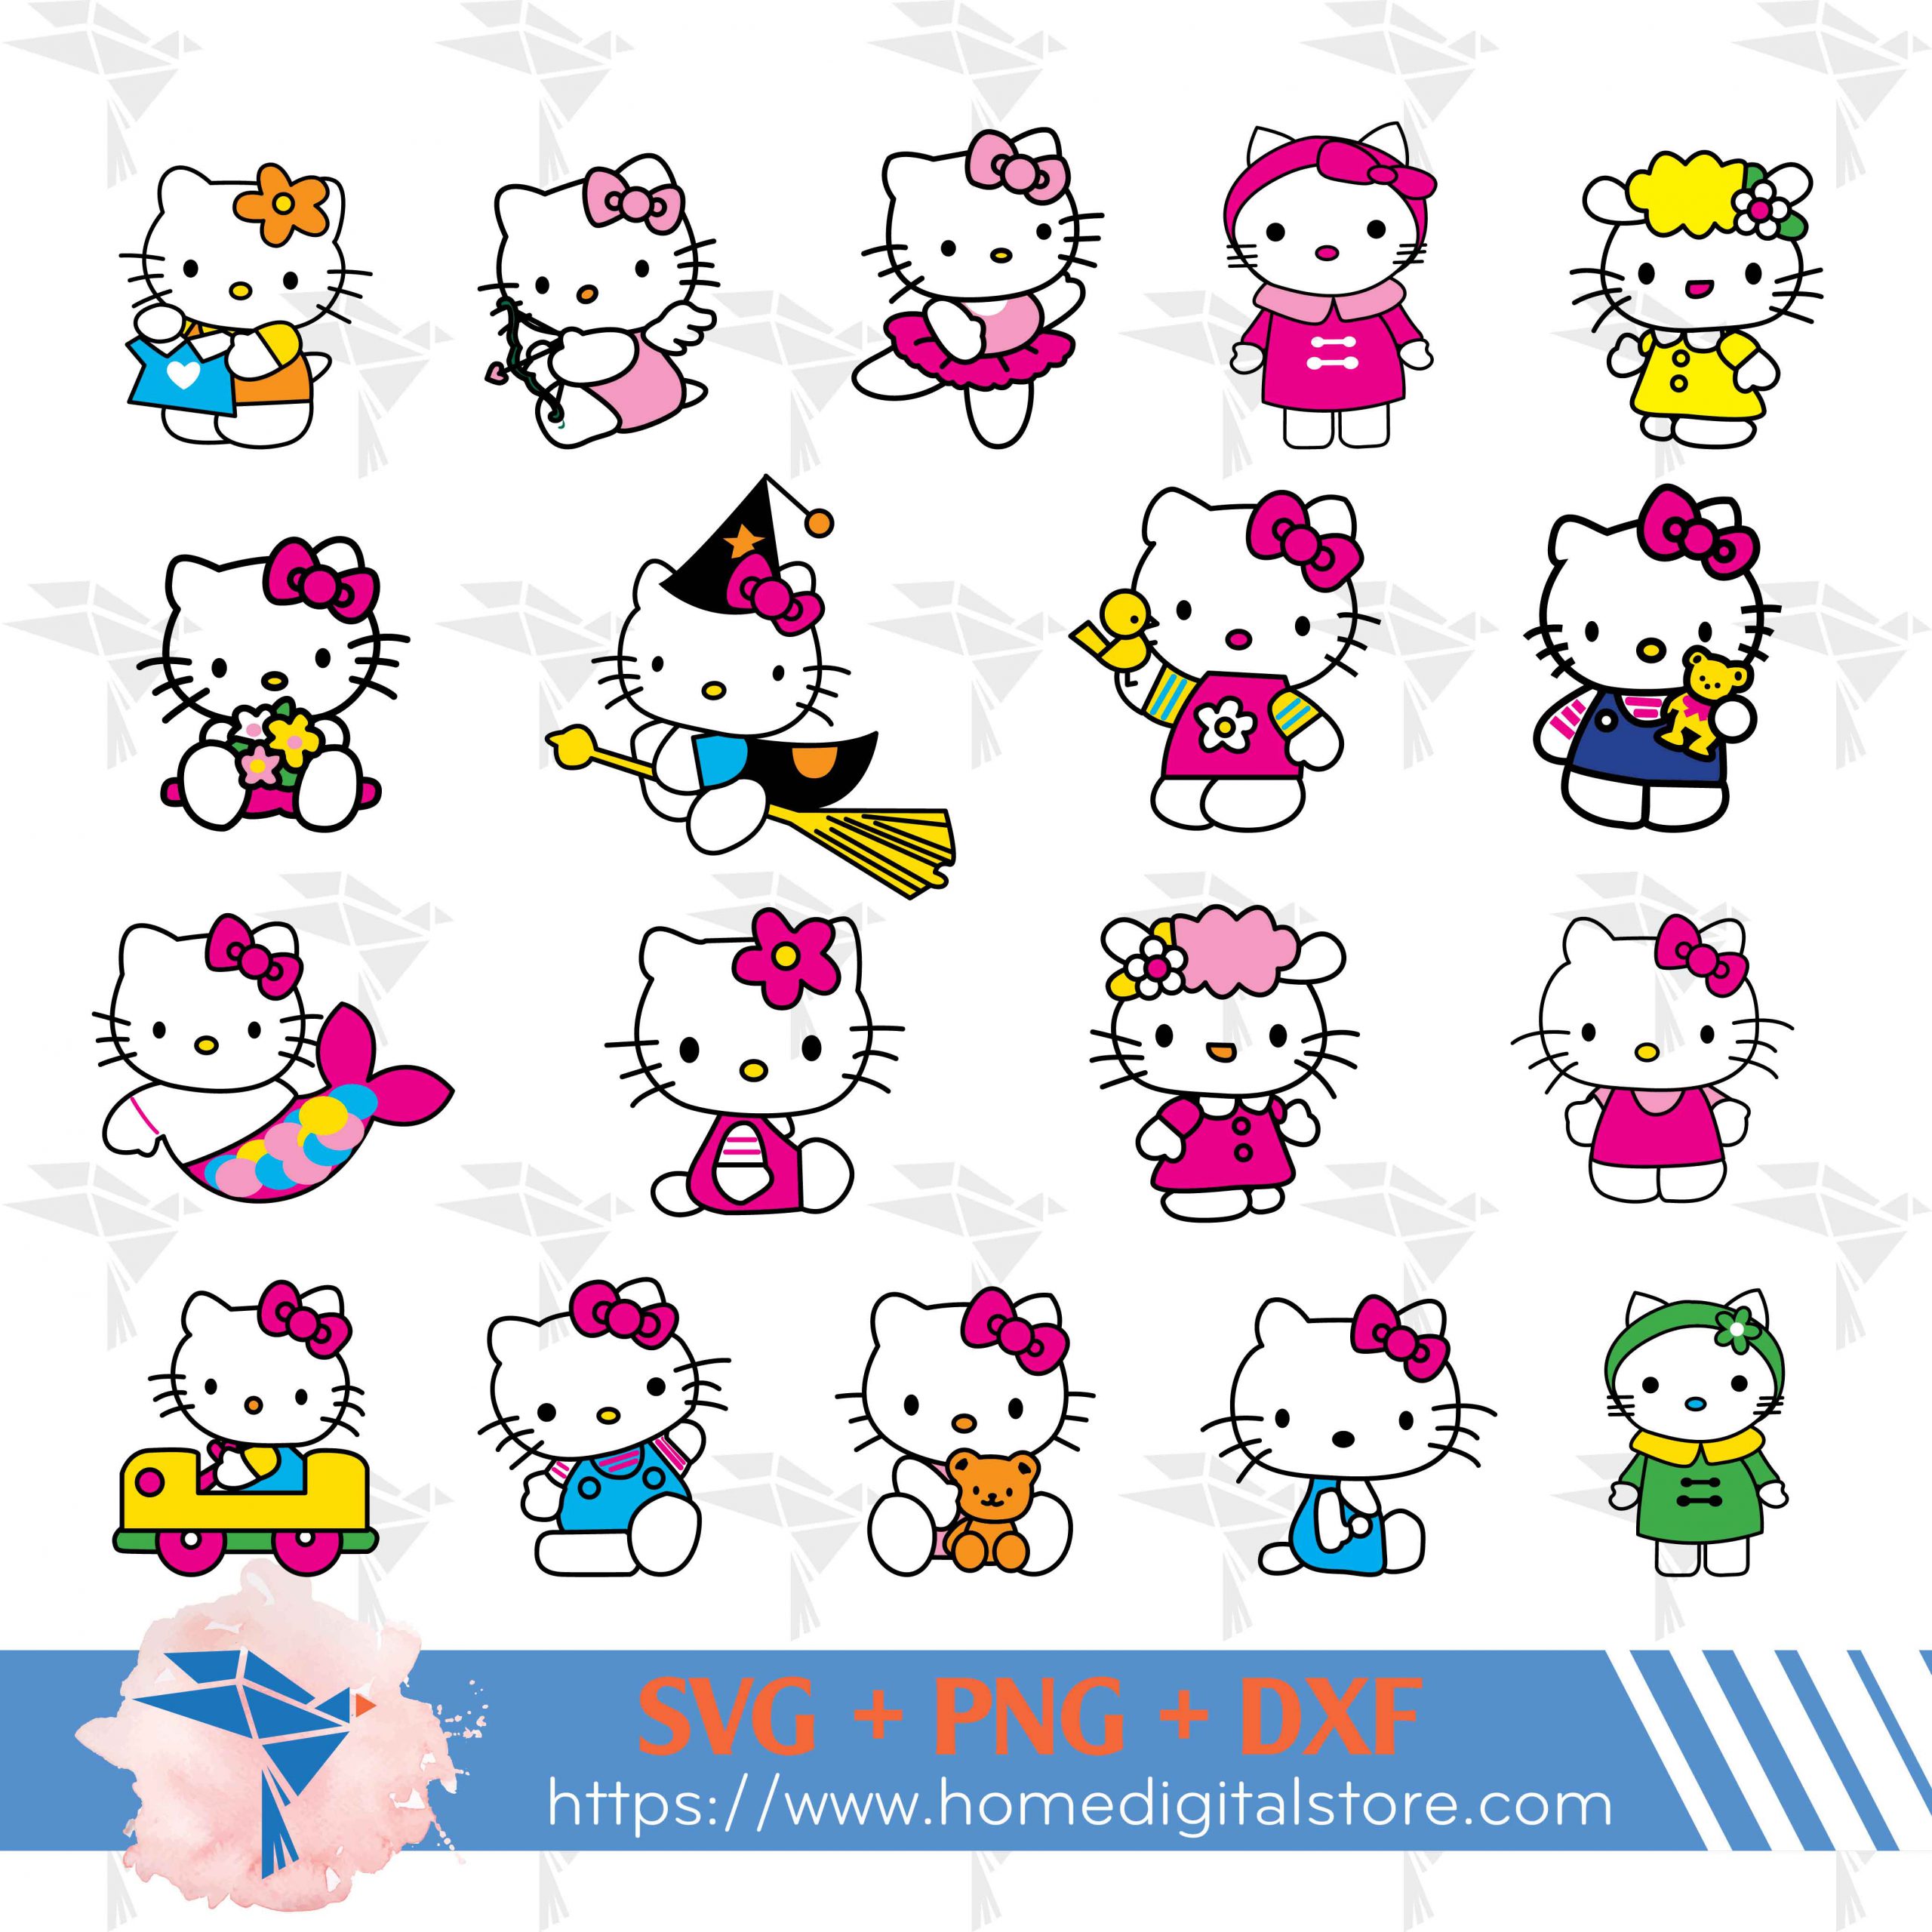 Hello Kitty Font: Download Font and Logo